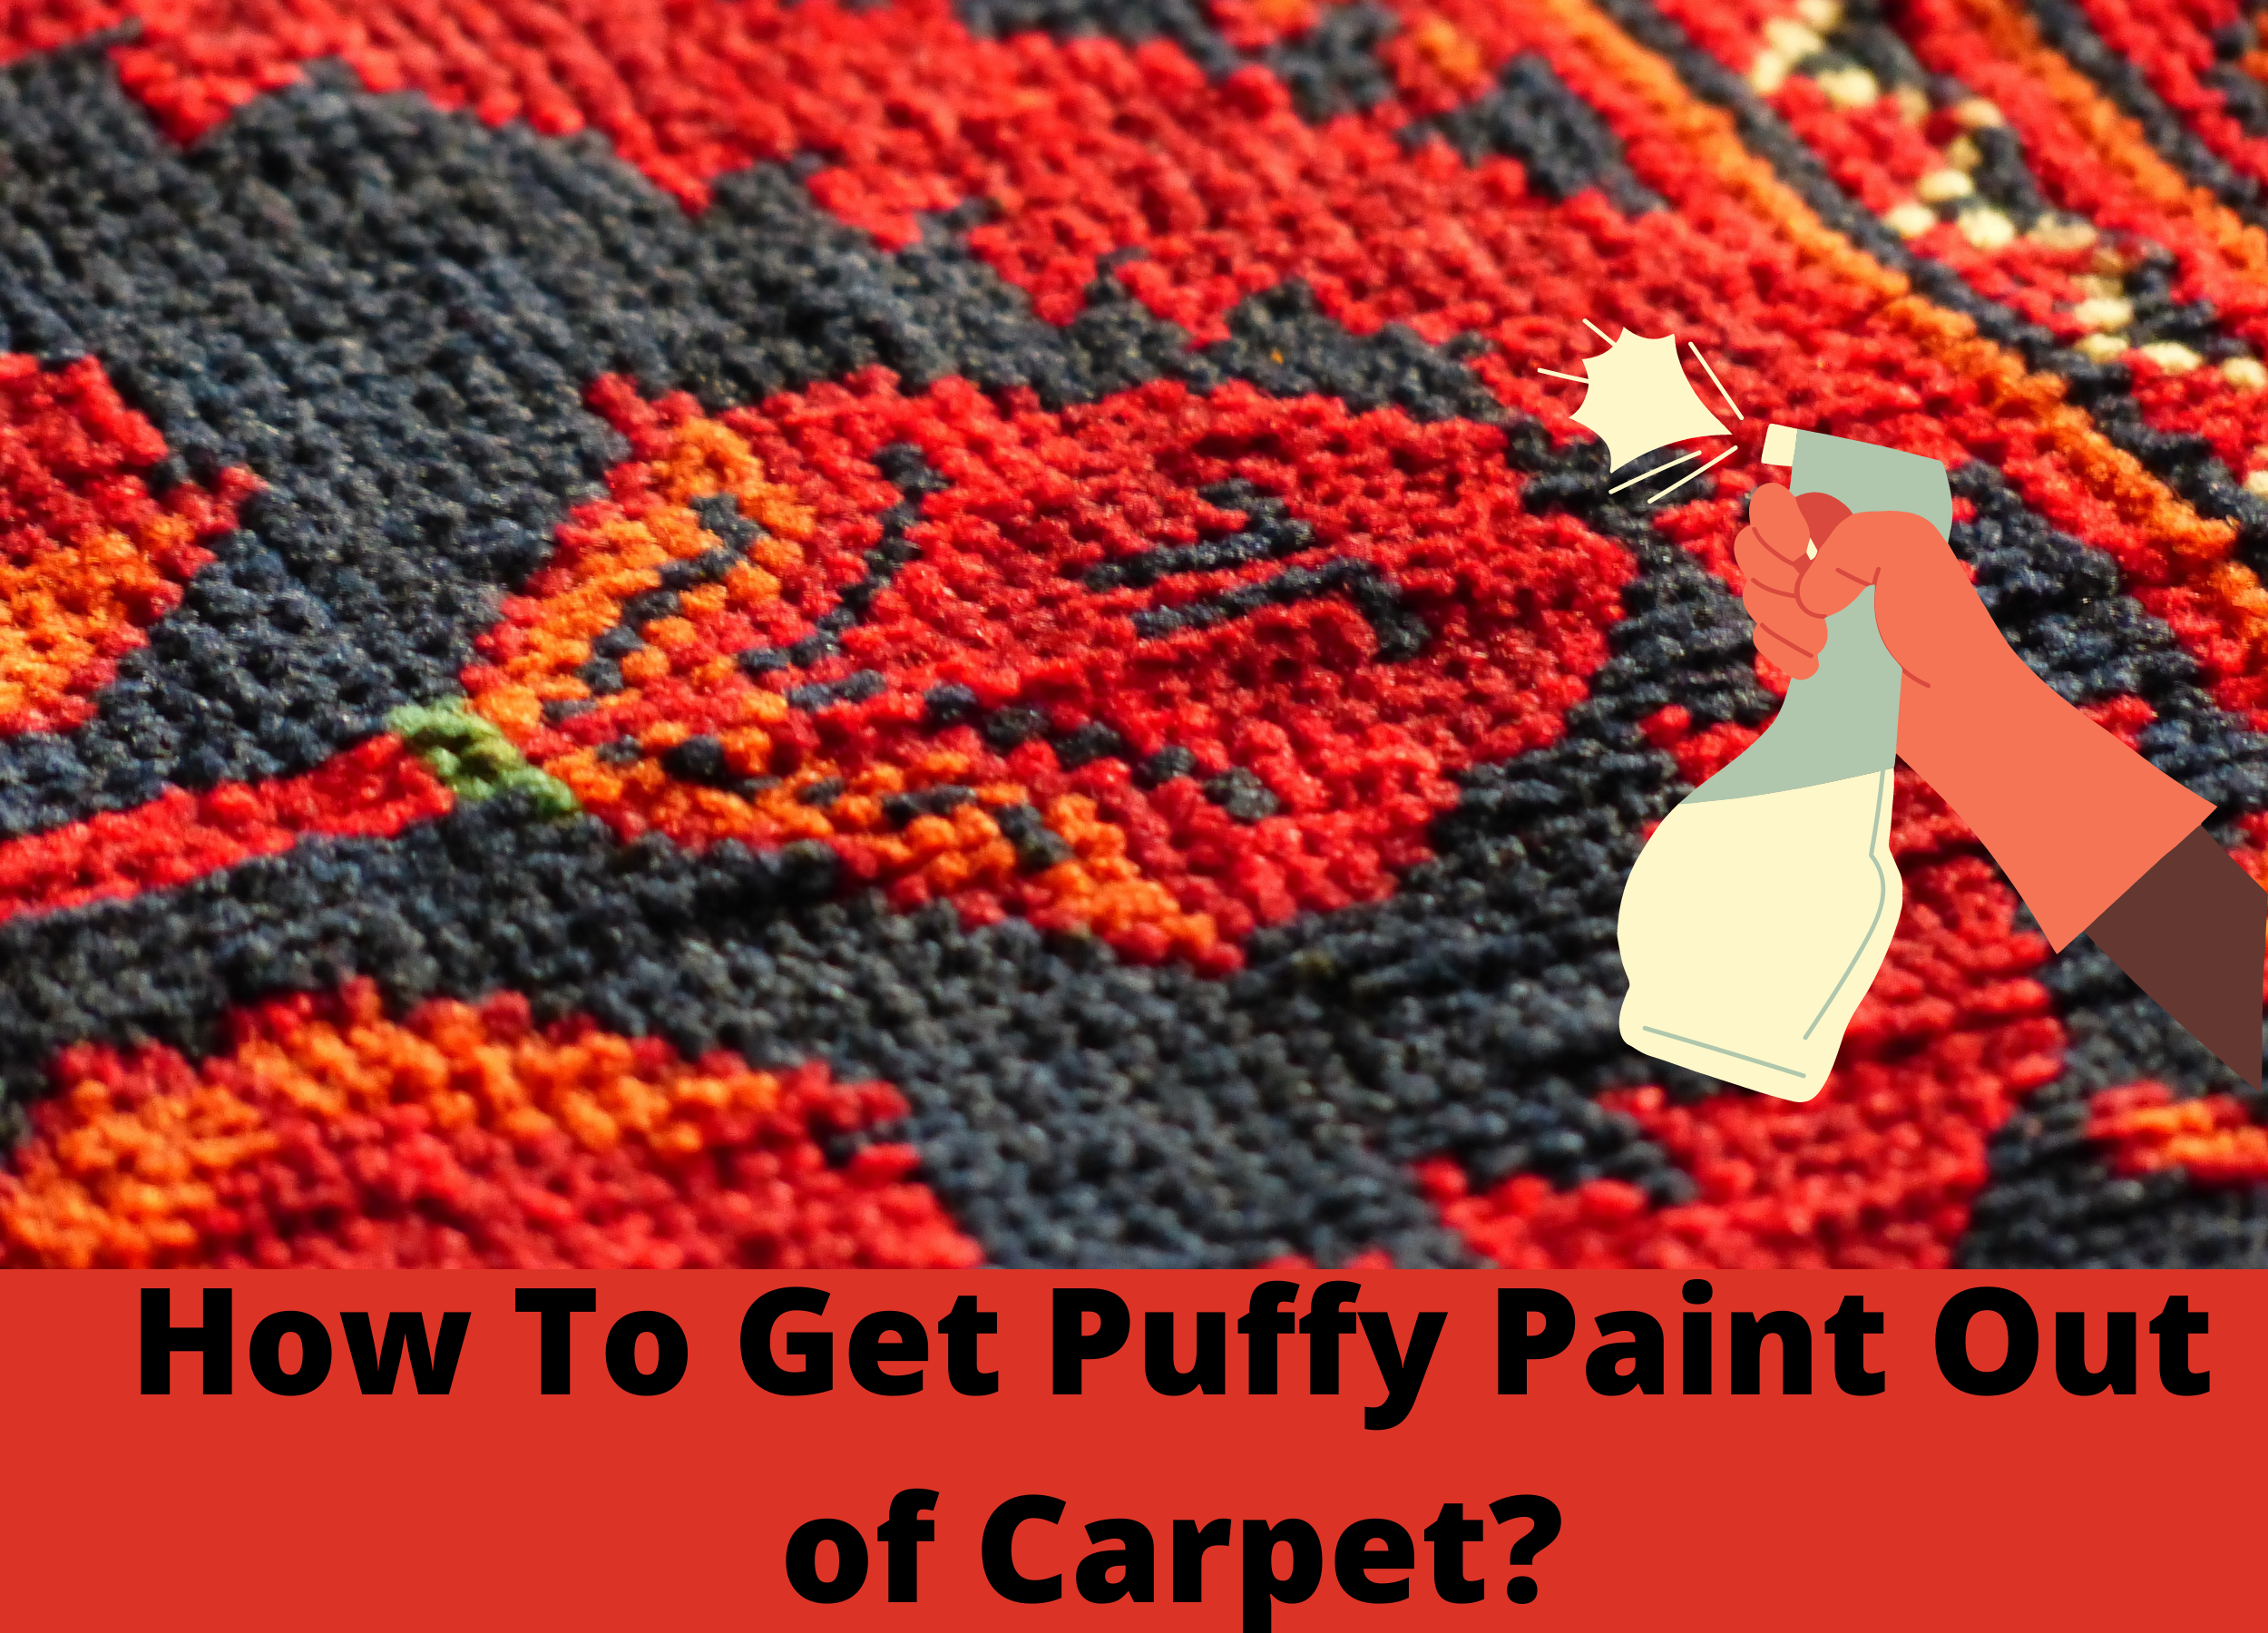 How To Get Puffy Paint Out of Carpet?